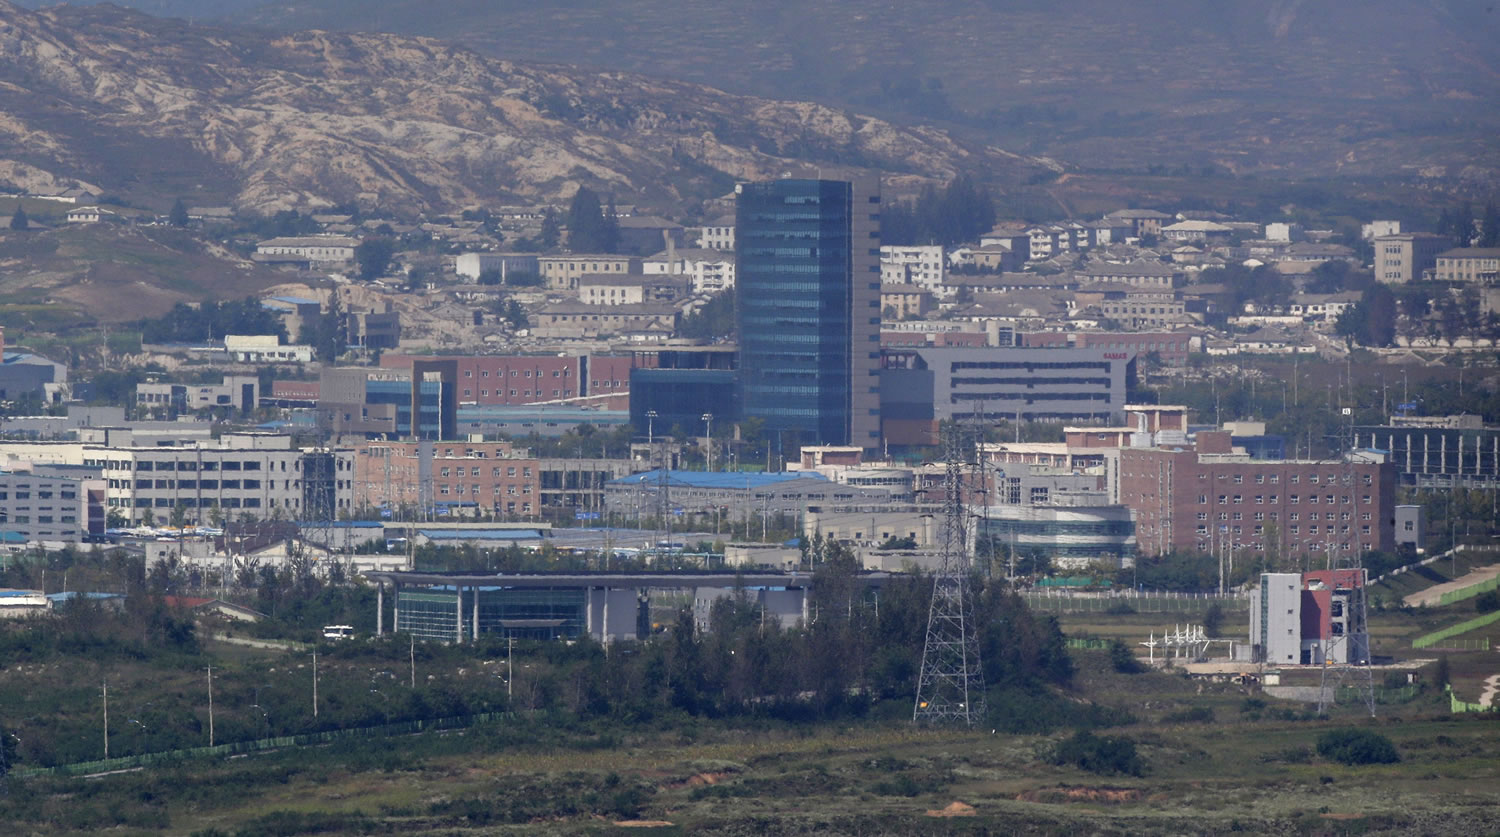 The Kaesong industrial complex, whish is seen from the Dora Observation Post in Paju near the border village of Panmunjom, which has separated the two Koreas since the Korean War, in Paju, north of Seoul, South Korea.